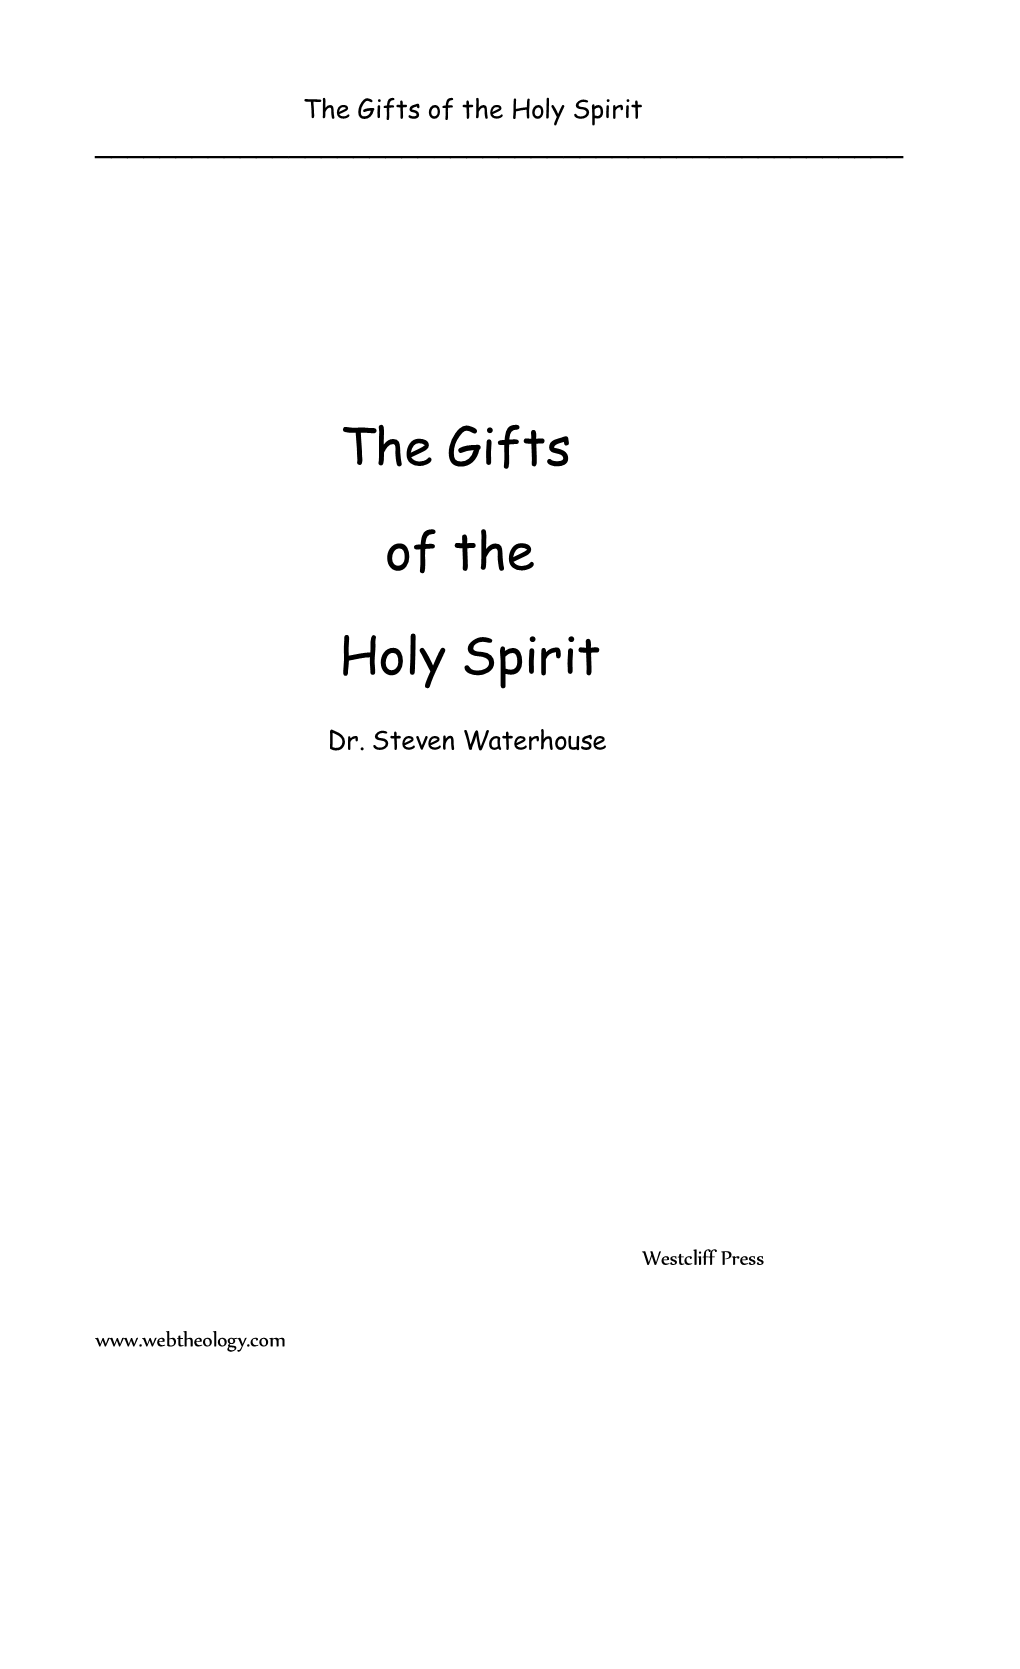 The Gifts of the Holy Spirit ______